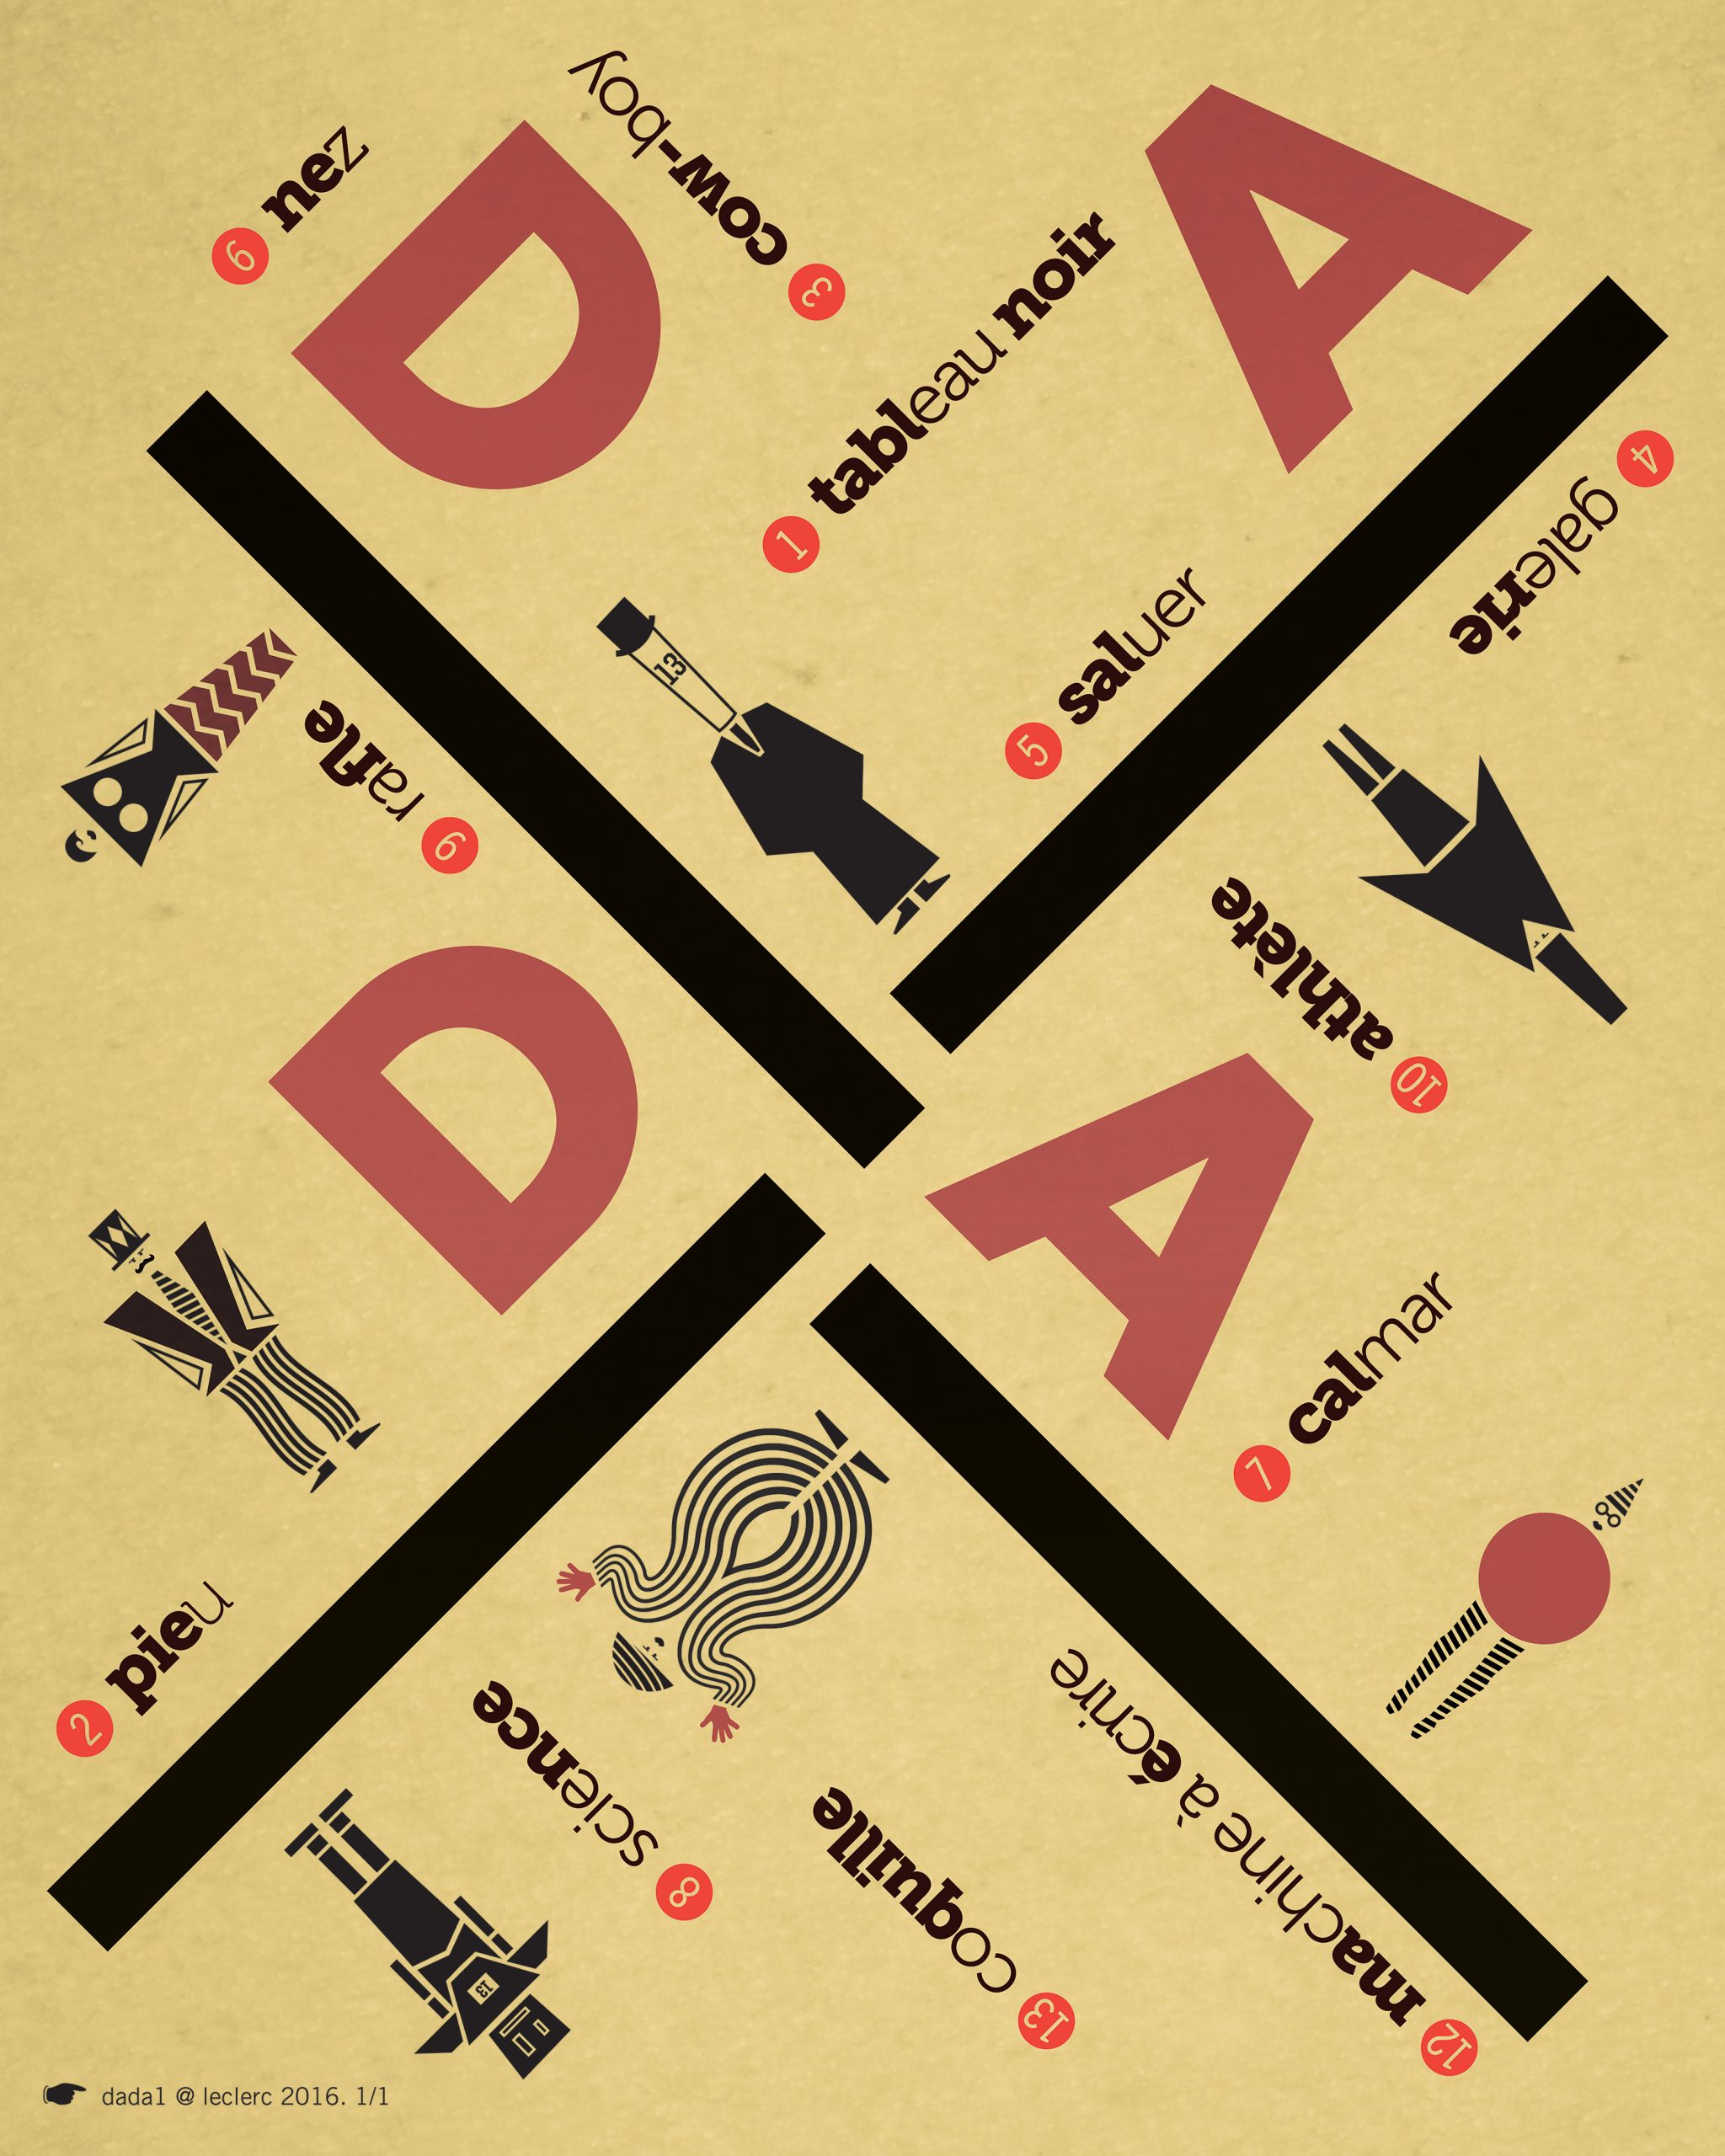 Dada 2. A composition of letterforms, rules, words and silhouettes of Dada's stage costumes.